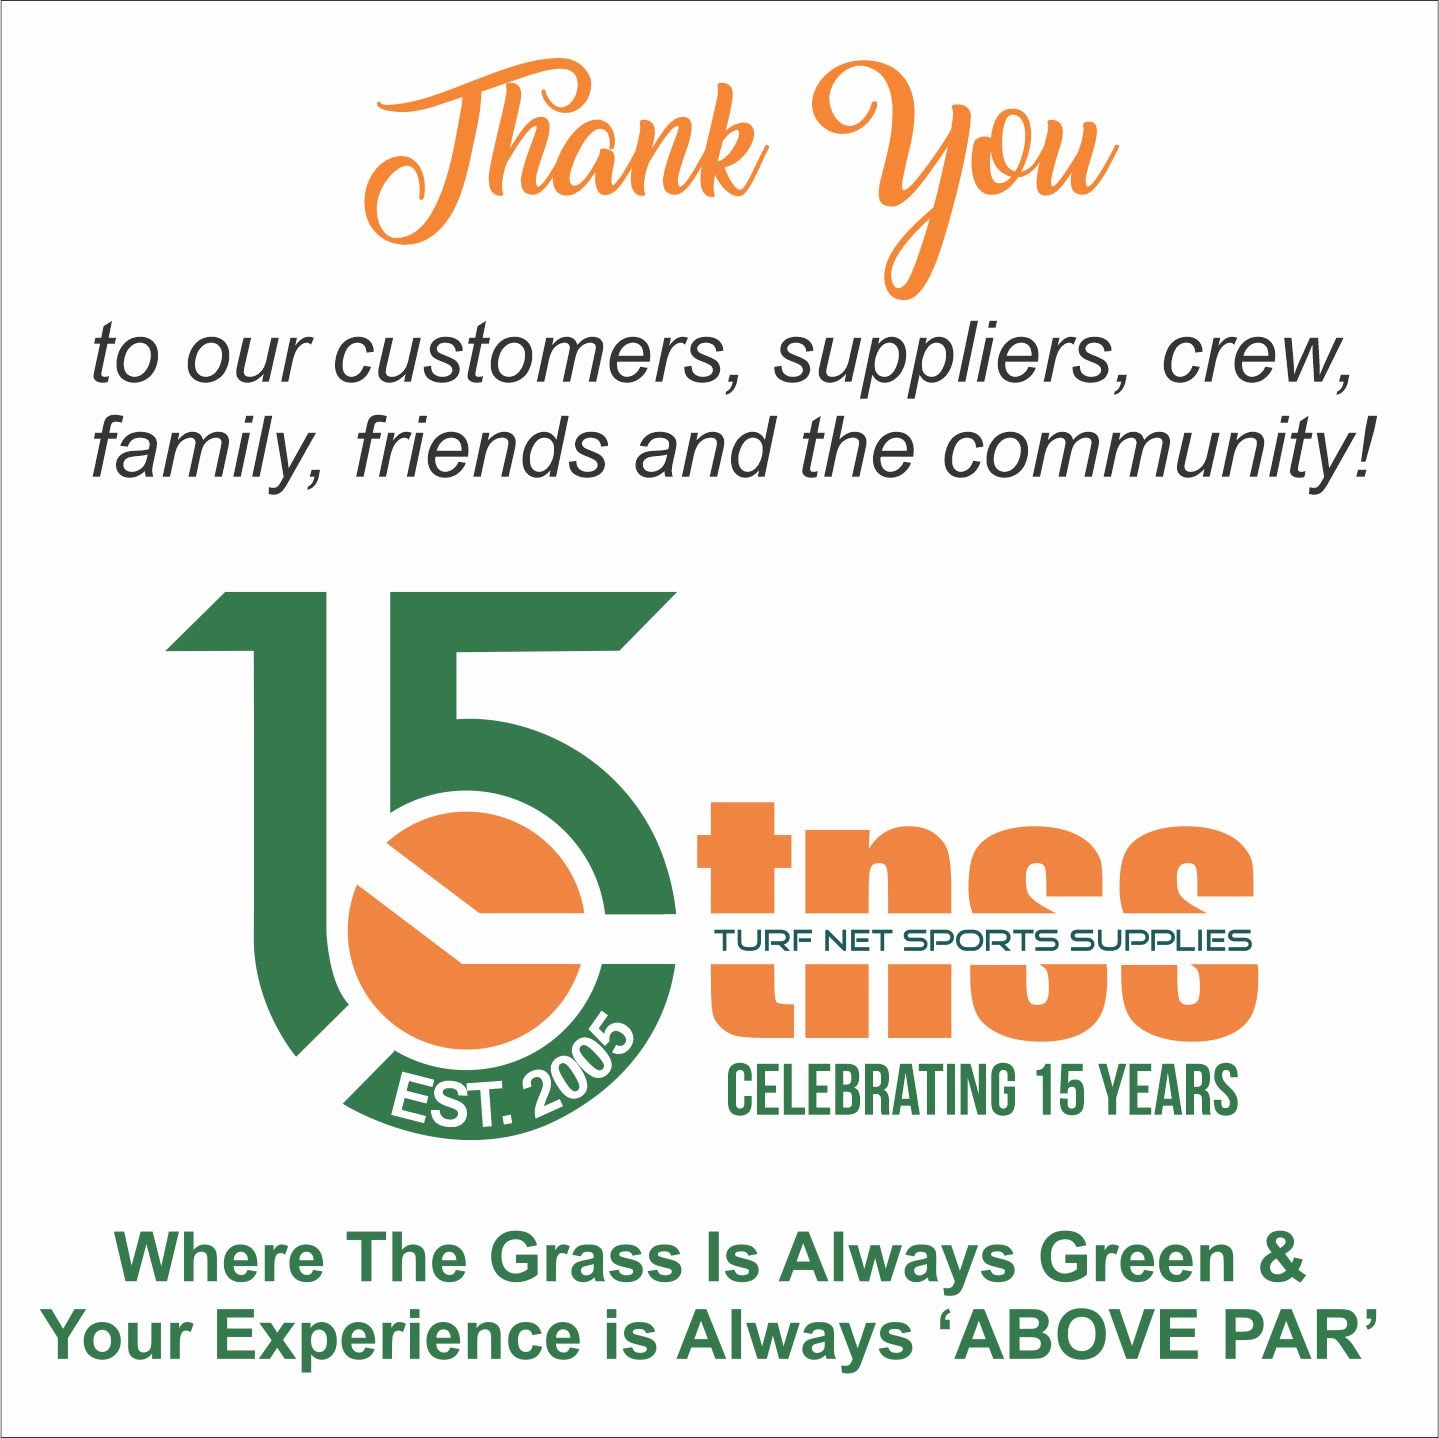 Thank you for a fabulous 15 years